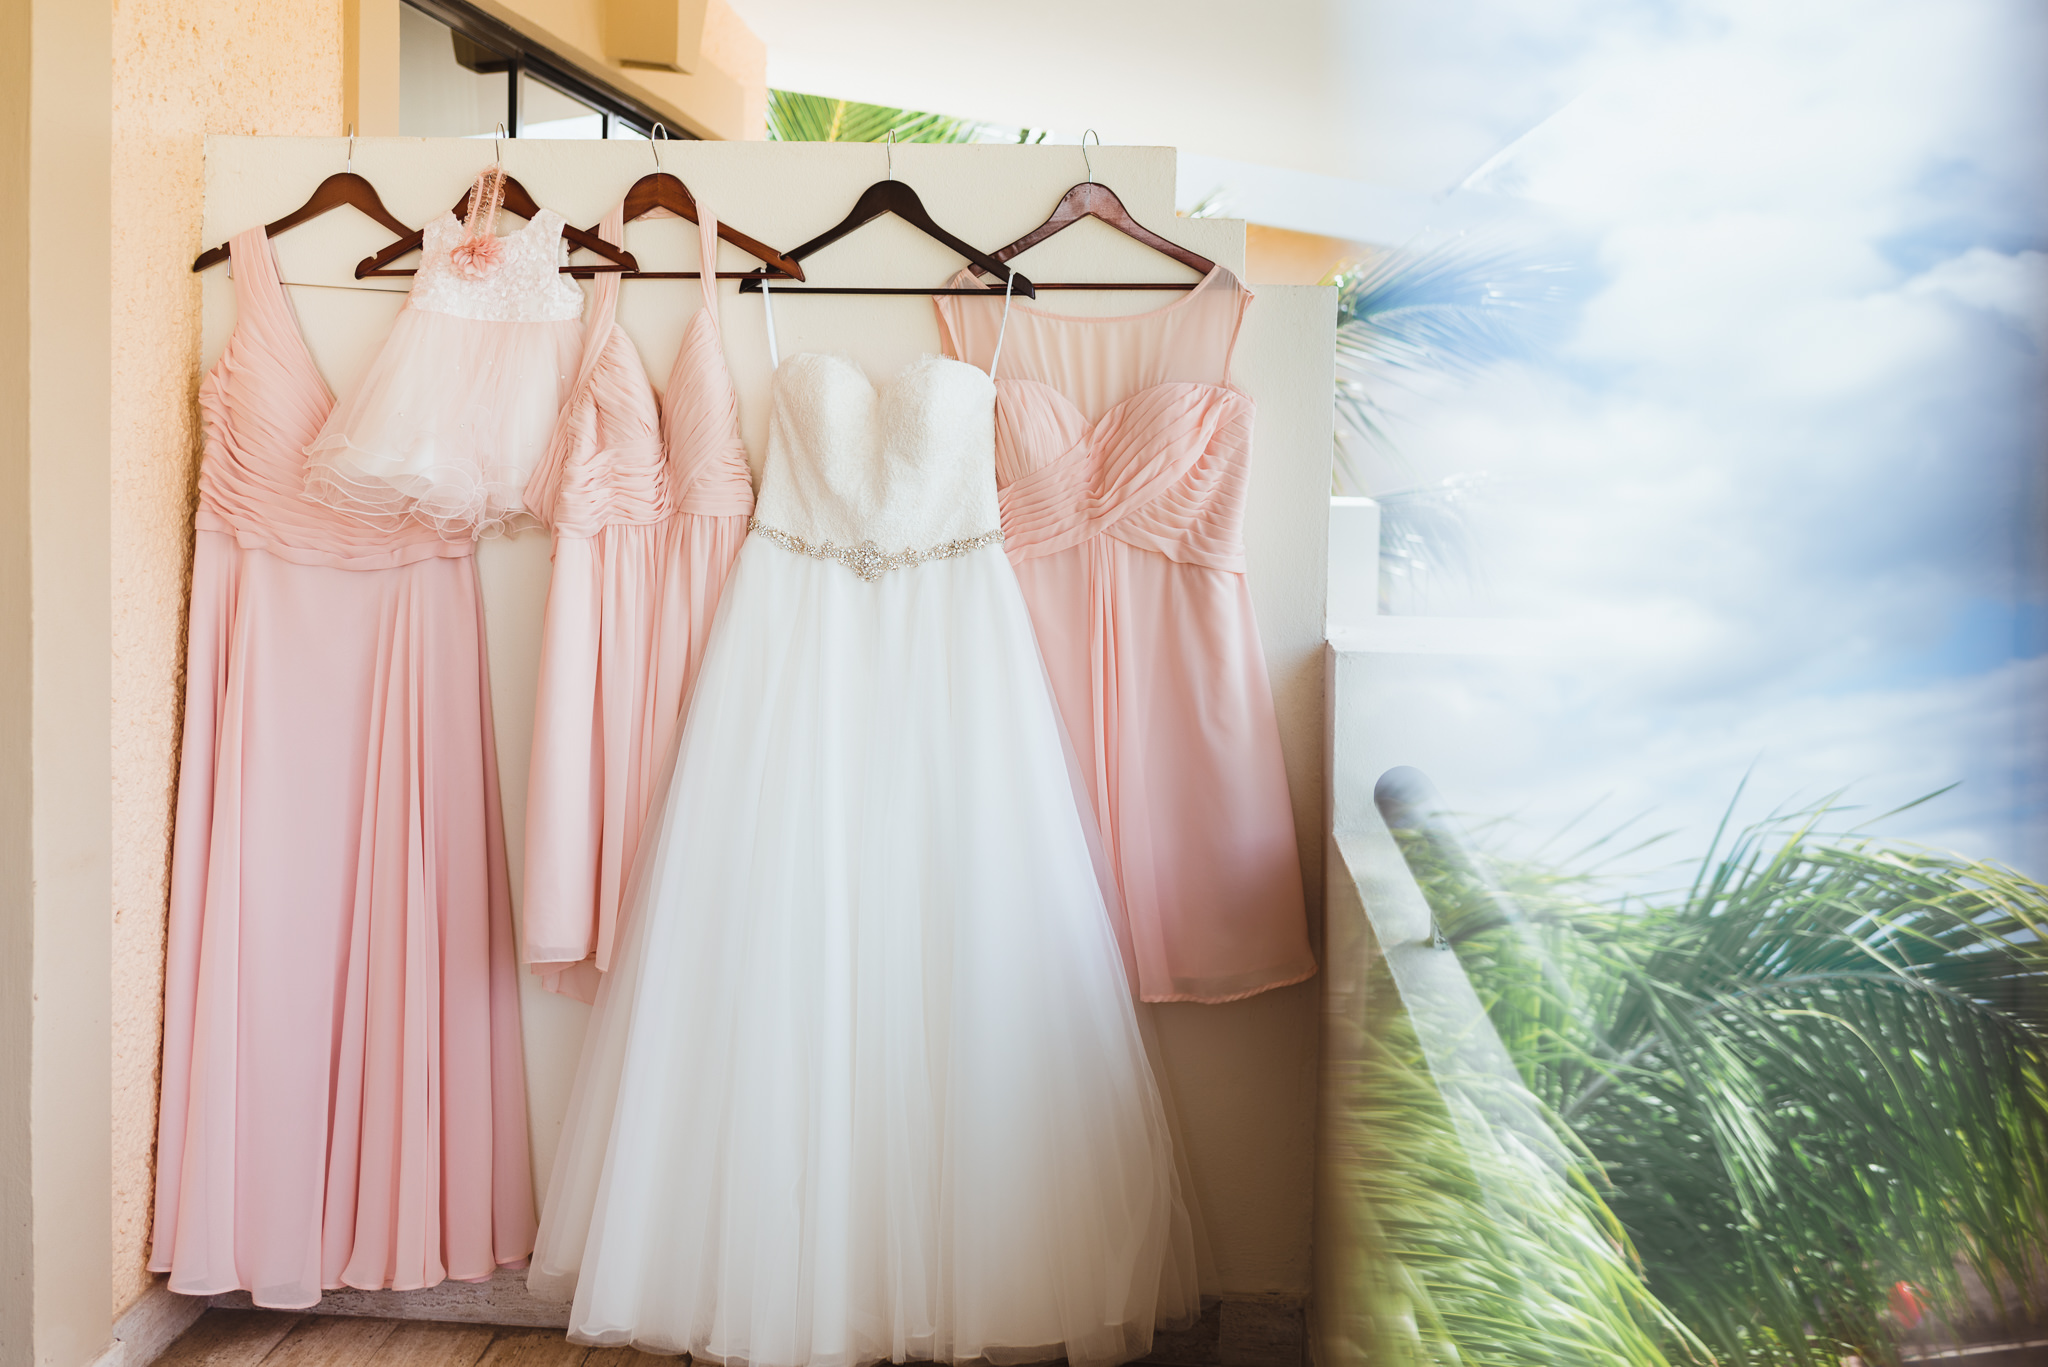 white brides dress and pink bridesmaids dresses hung on hangers before destination wedding at Now Sapphire Resort in Mexico 